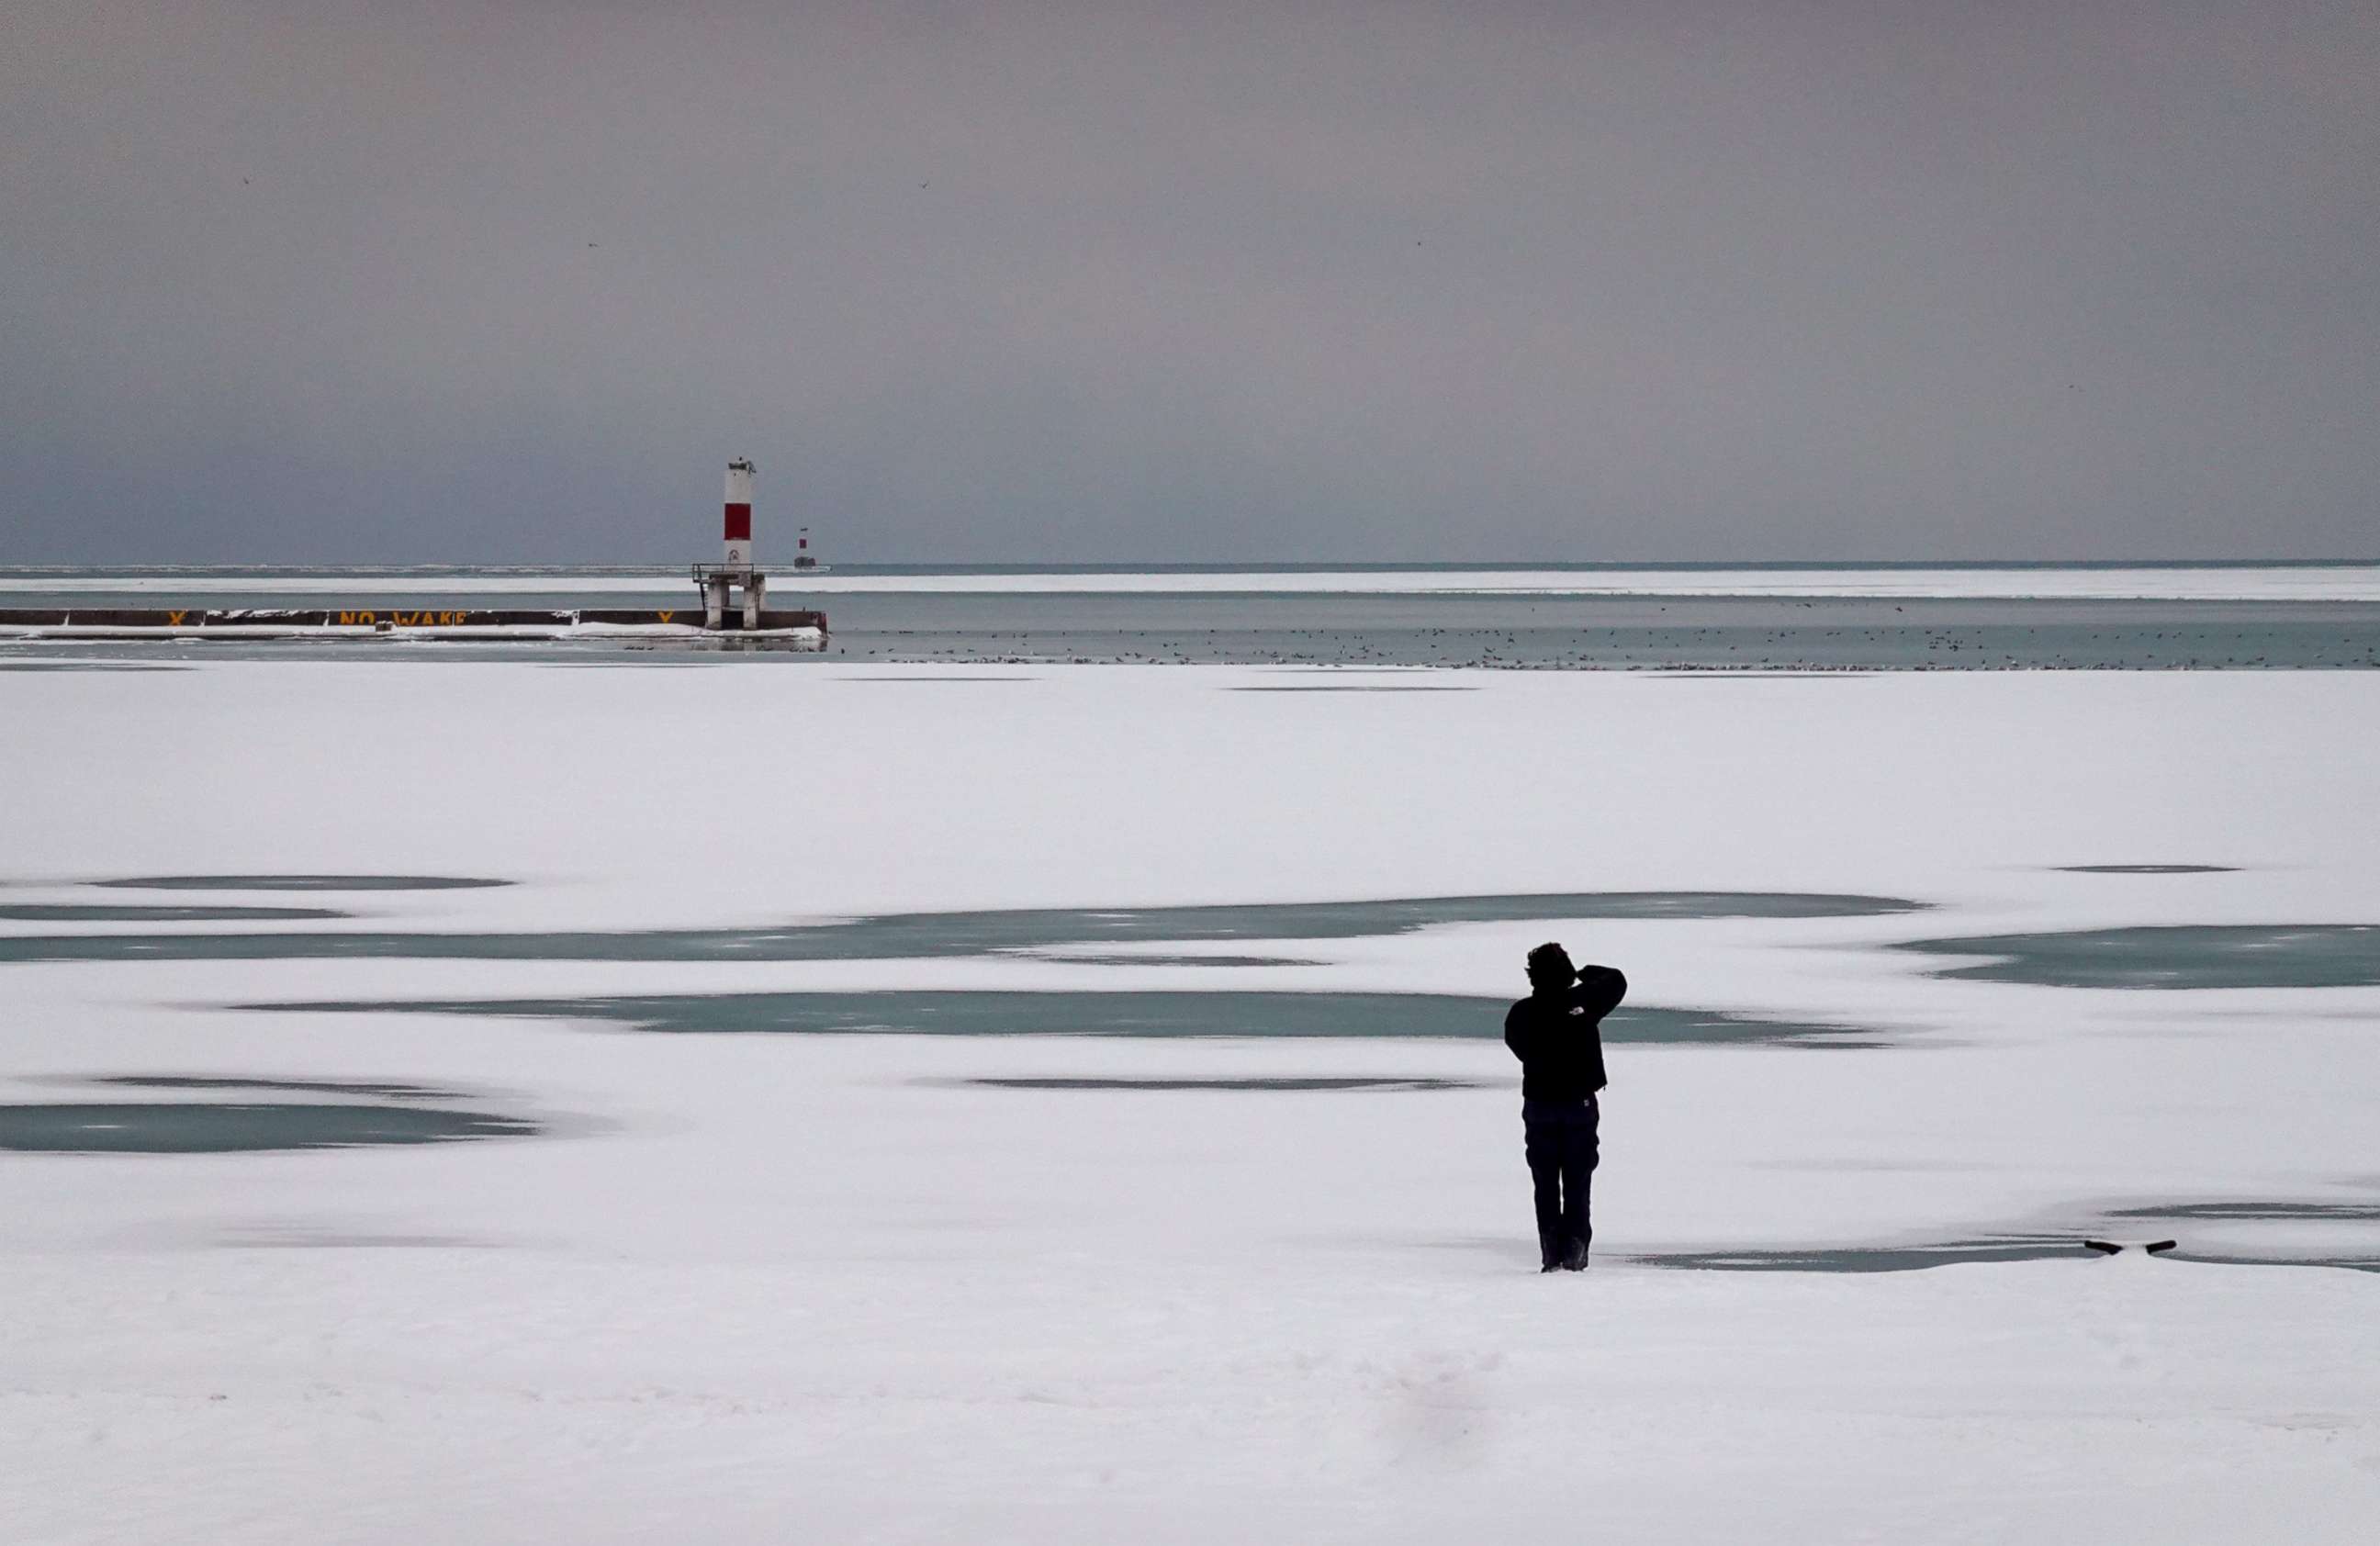 PHOTO: A man takes a picture along the  frozen shoreline of Lake Michigan on Ja. 24, 2022 in Chicago.